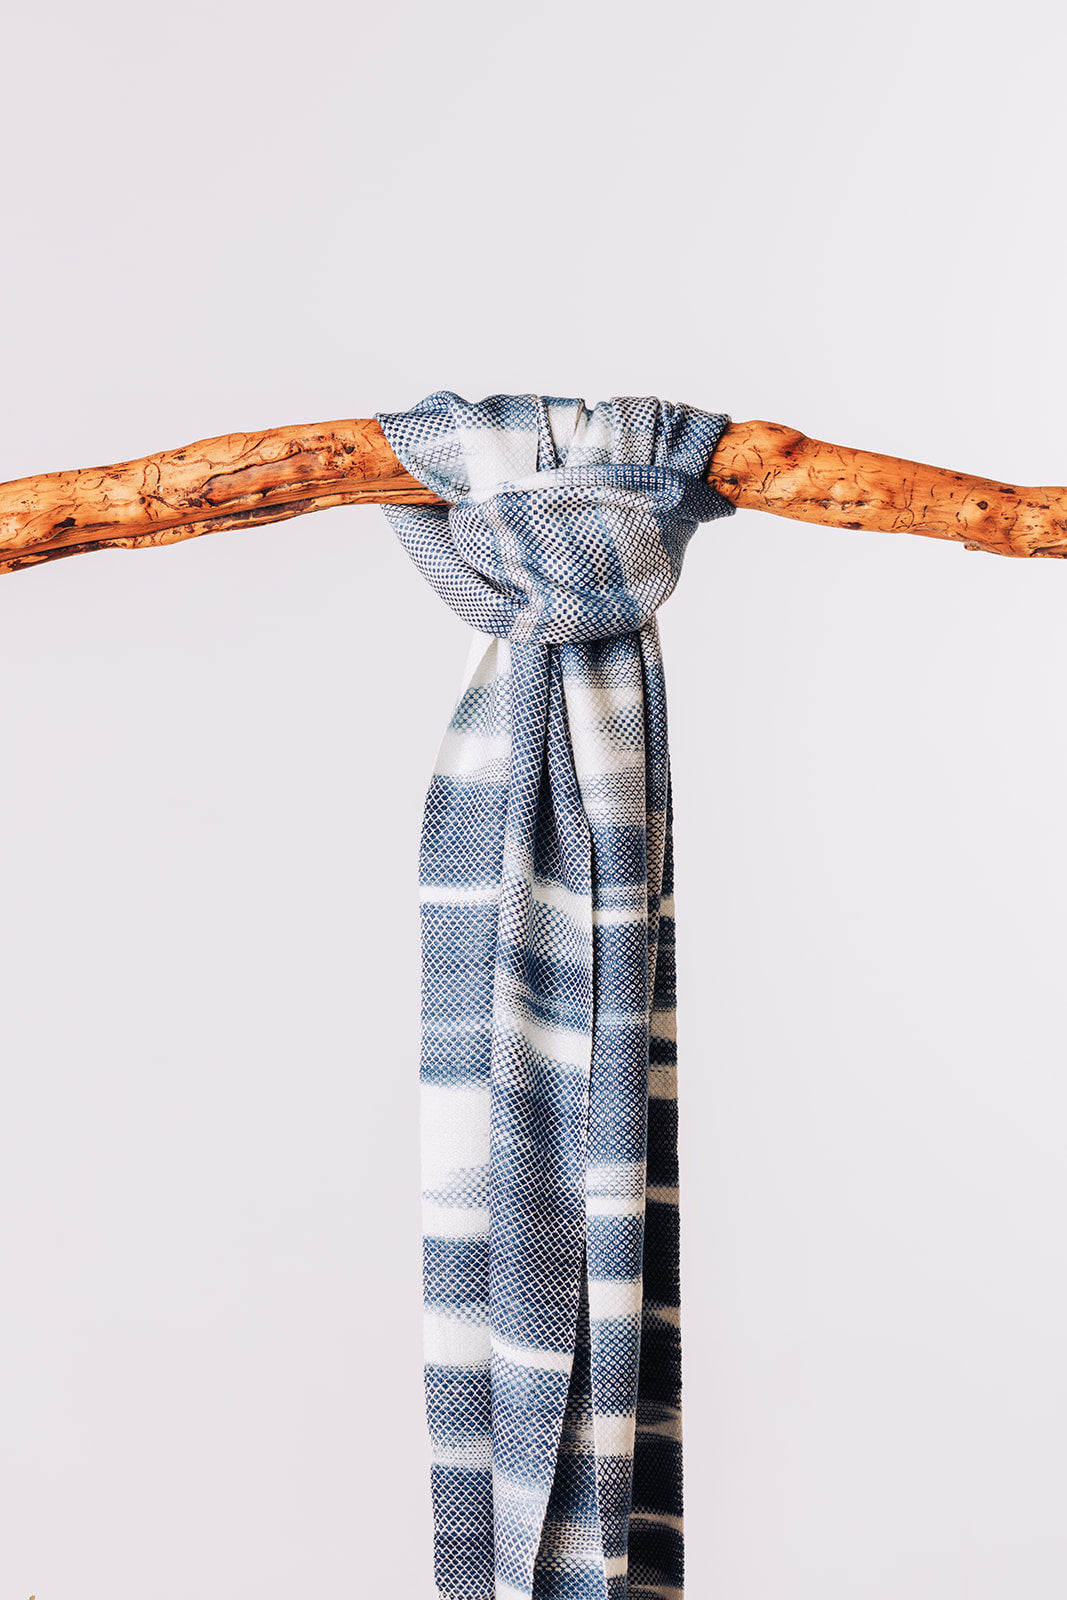 Flow of Water Cotton Scarf